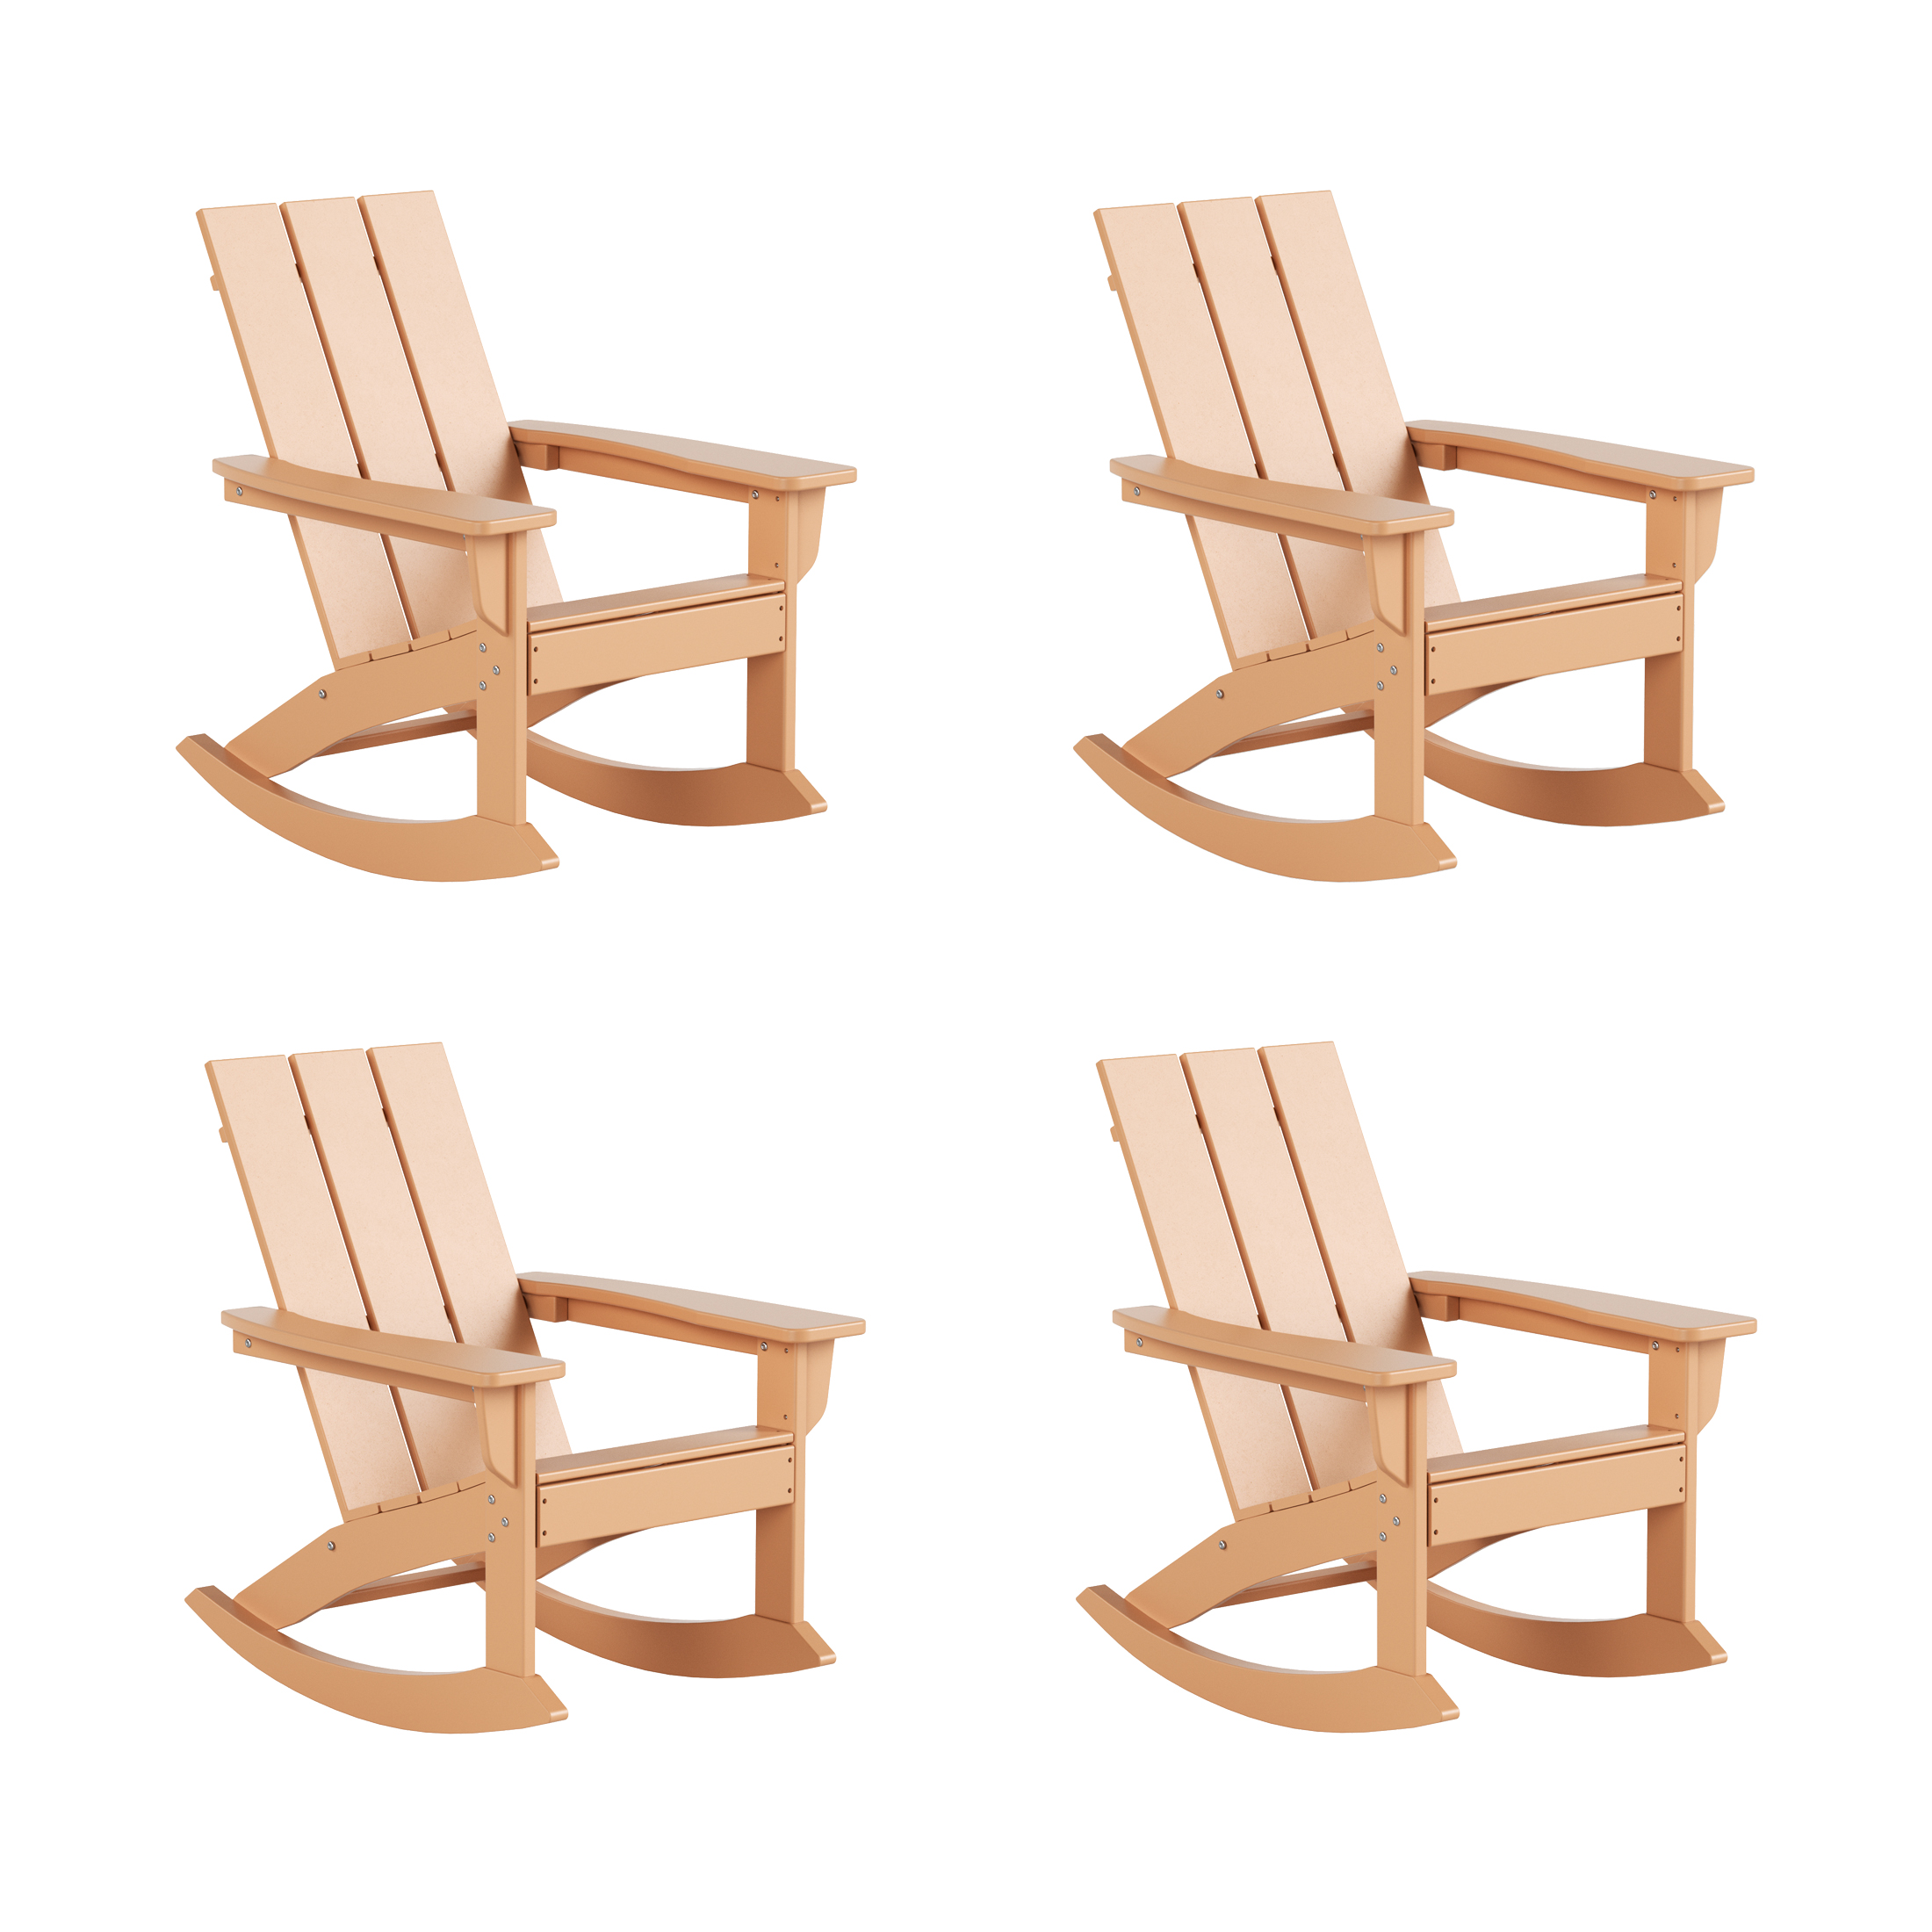 WestinTrends Ashore Patio Rocking Chairs Set of 4, All Weather Poly Lumber Plank Adirondack Rocker Chair, Modern Farmhouse Outdoor Rocking Chairs for Porch Garden Backyard and Indoor, Teak - image 1 of 7